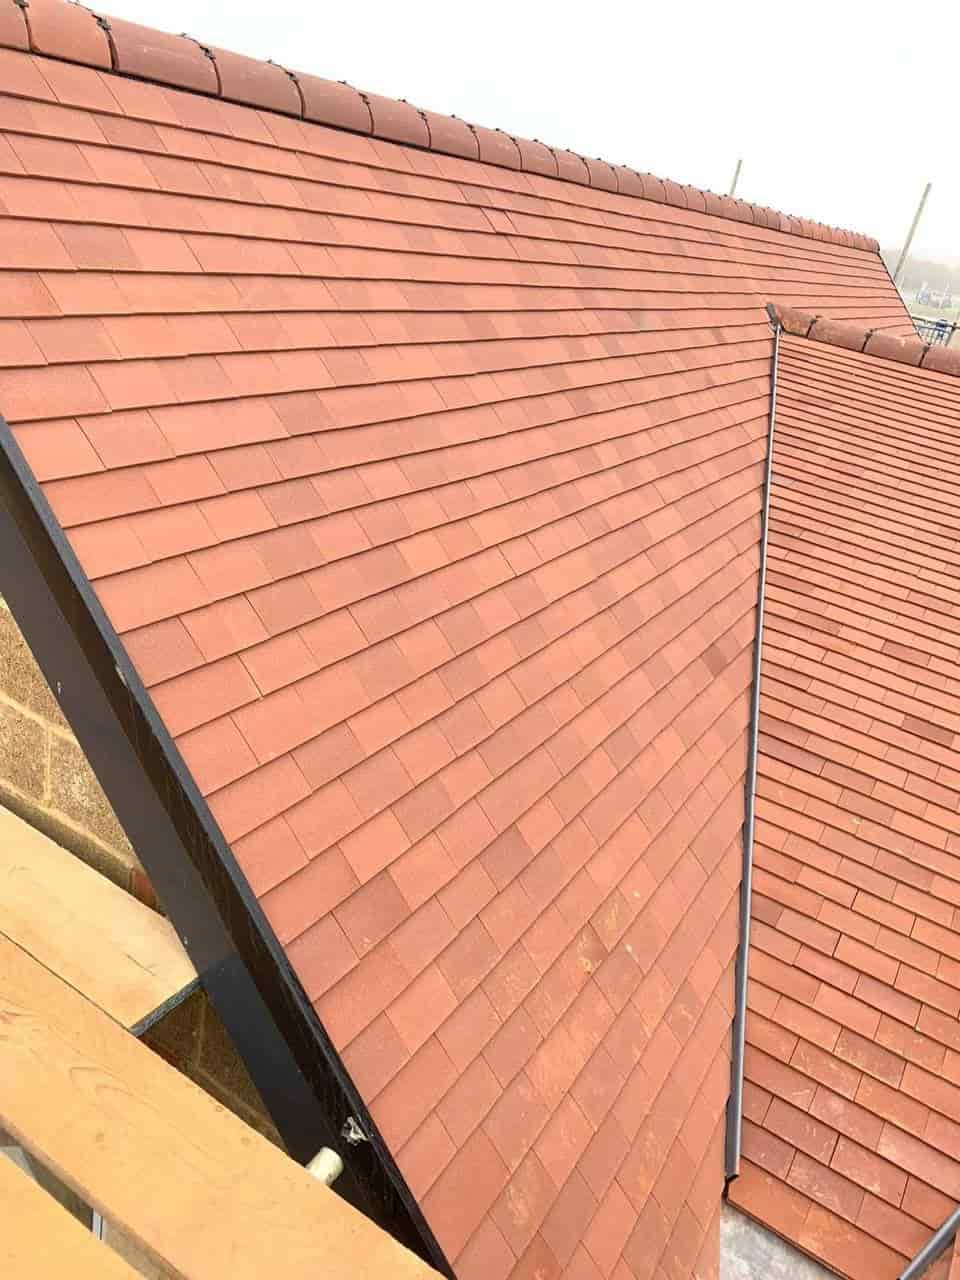 This is a photo of a new build roof installed in Tenterden, Kent. All works carried out by Tenterden Roofers